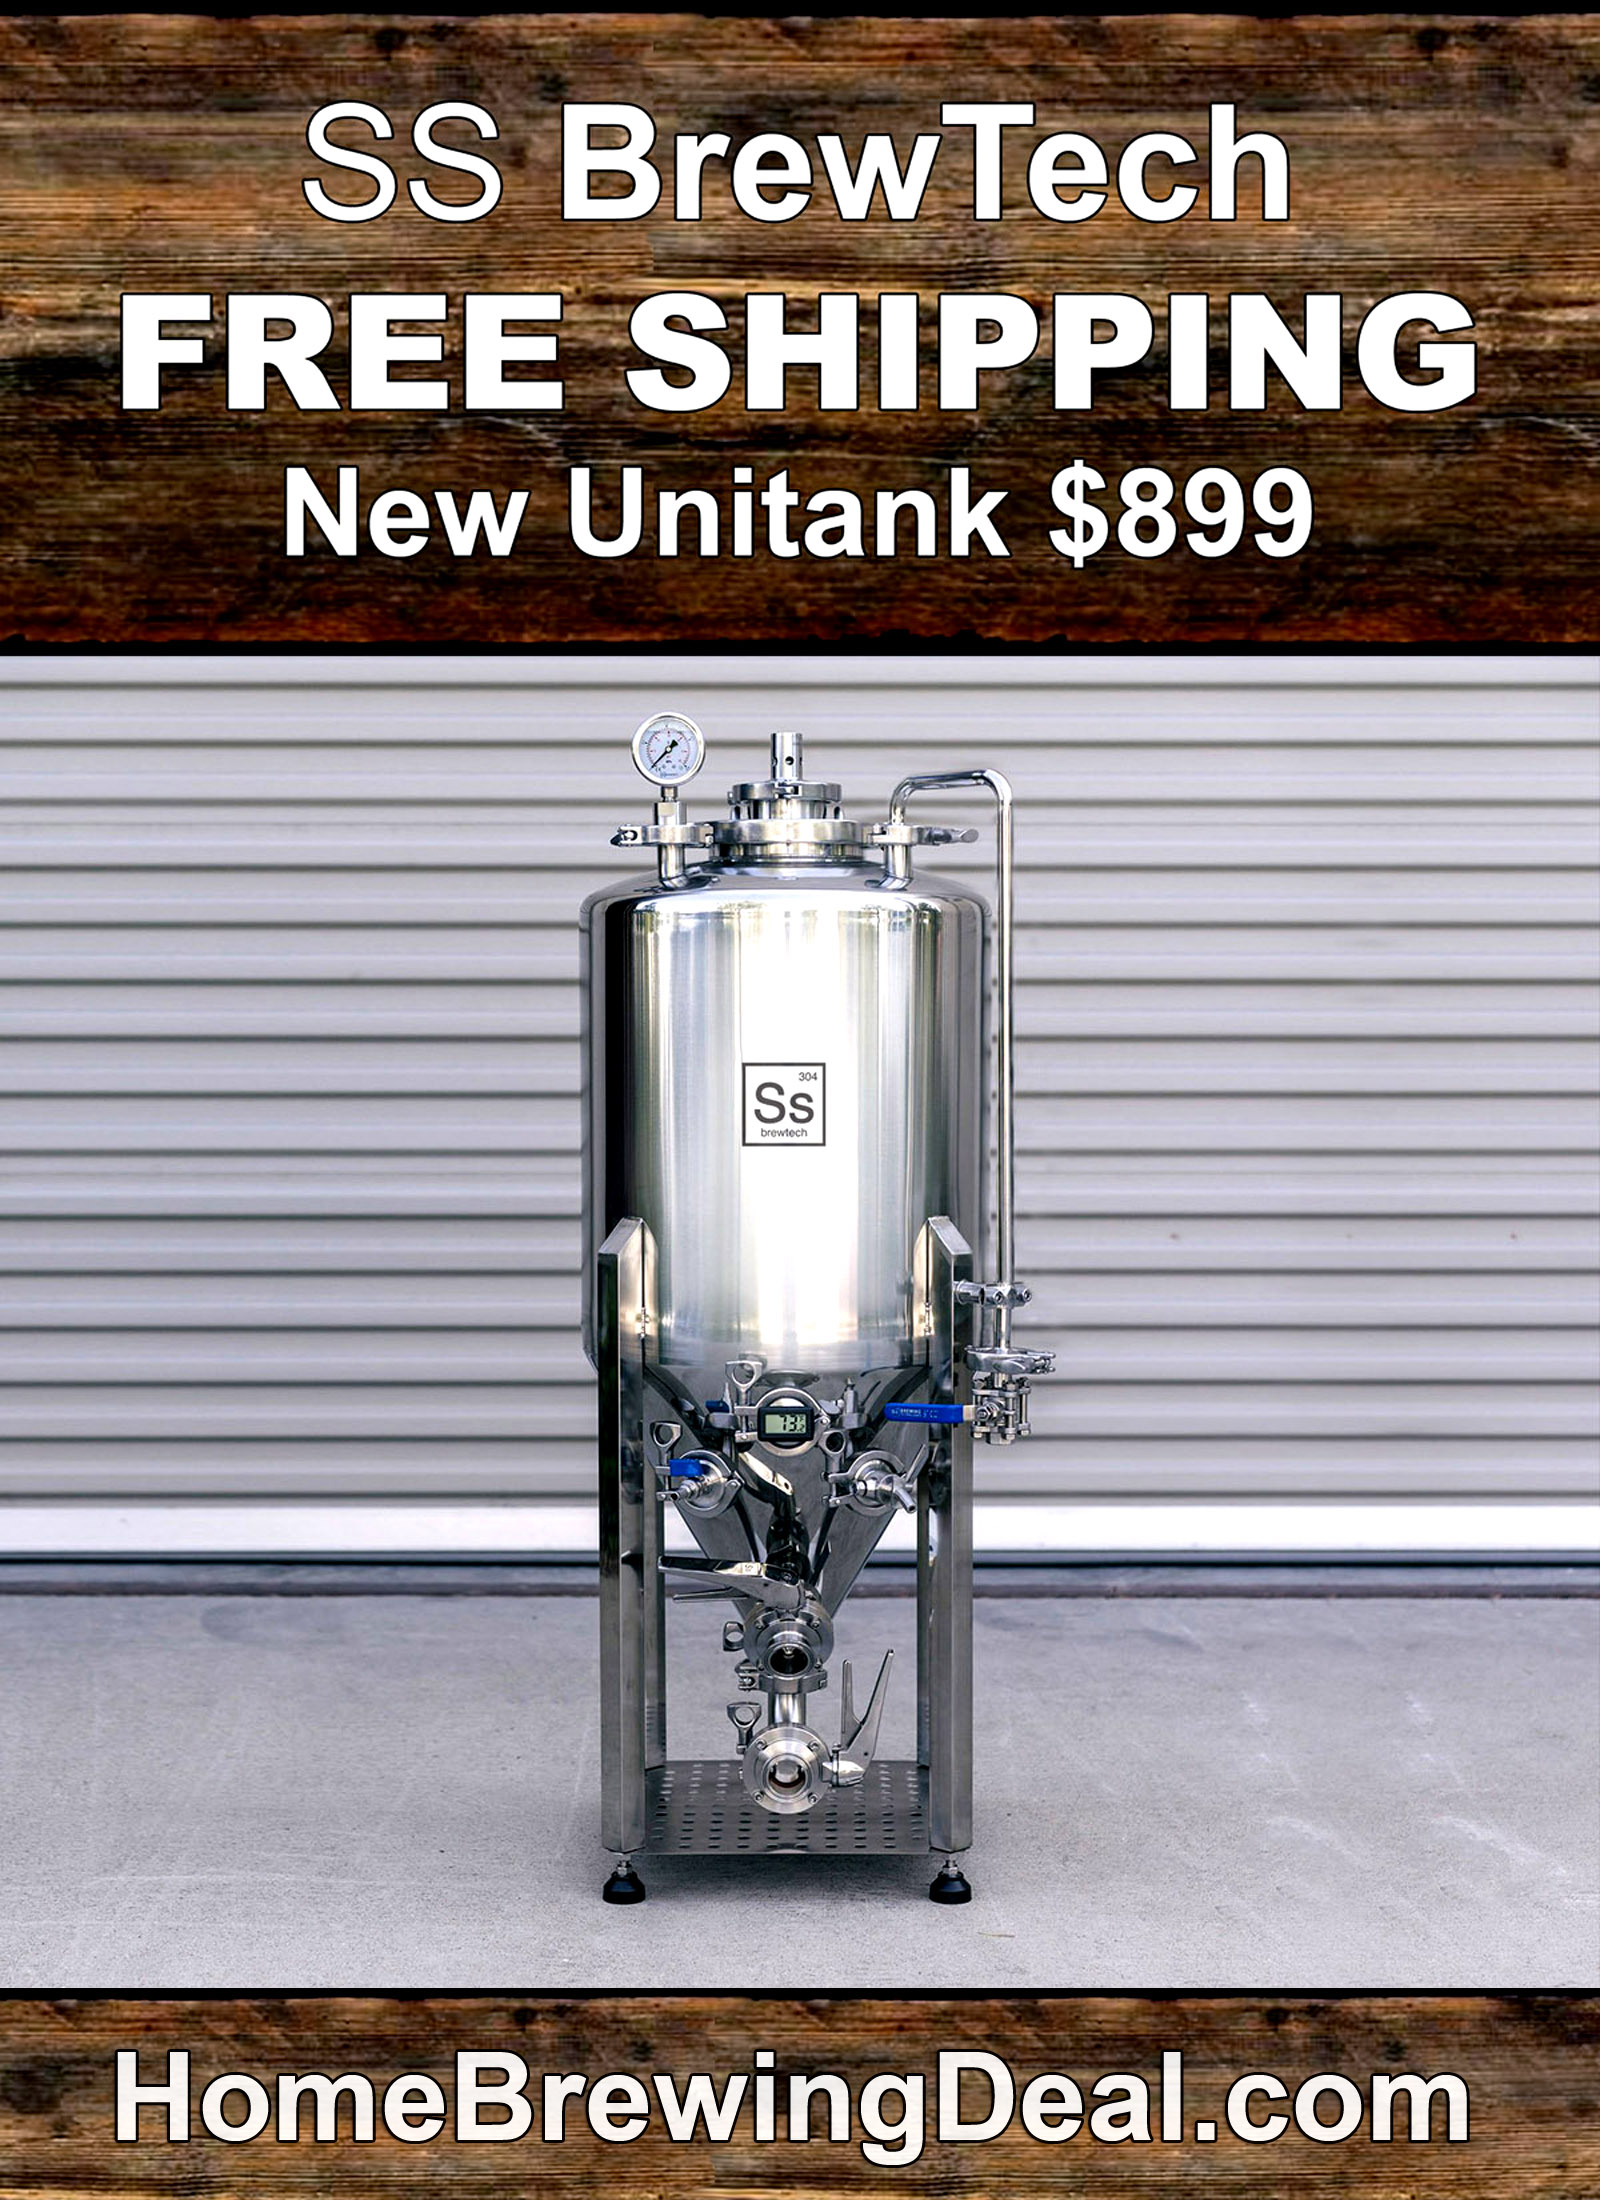  Home Brewer Promo Code for Get a NEW SS BrewTech Unitank for $899 and Free Shipping Coupon Code